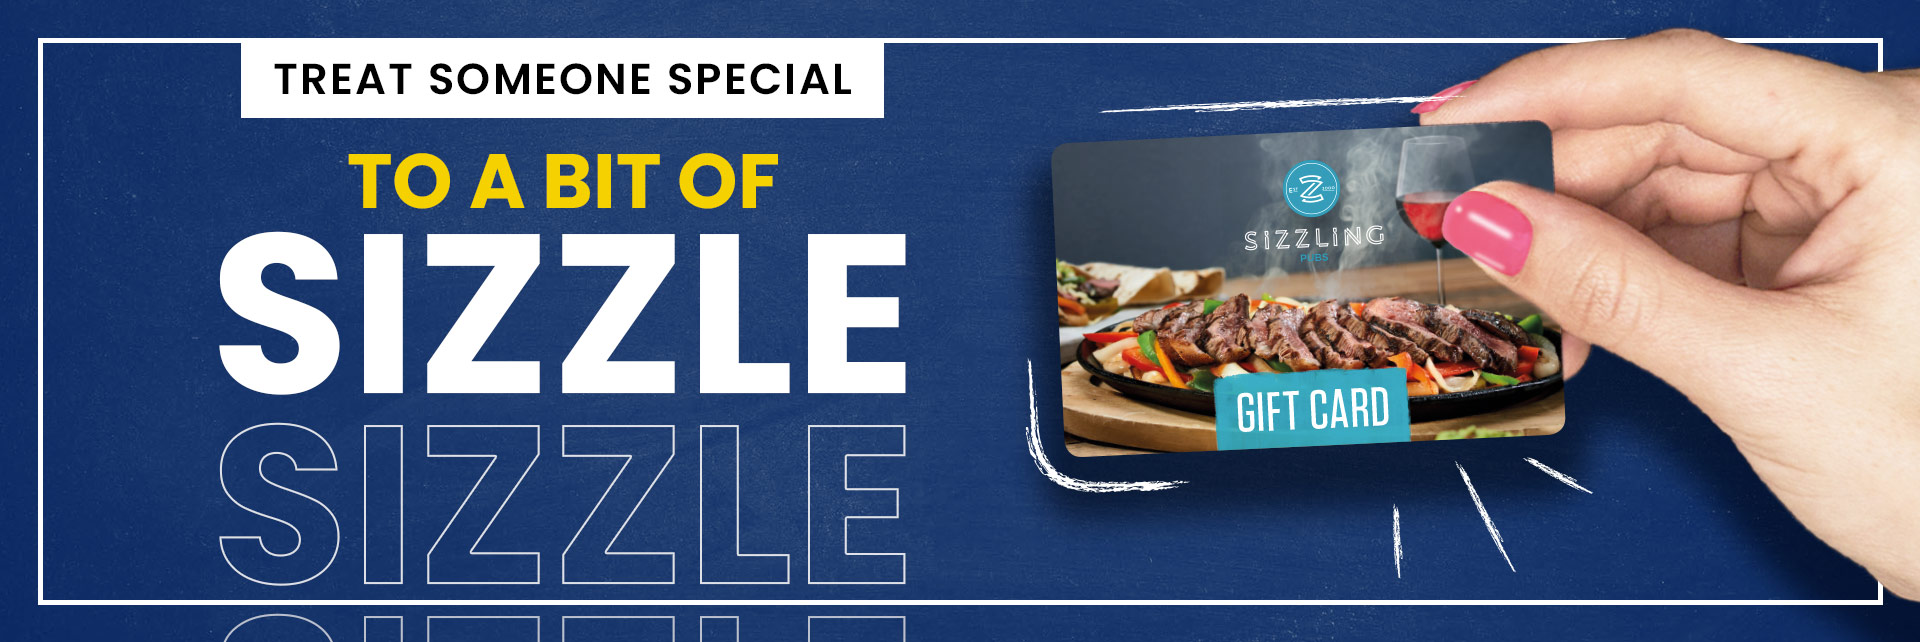 Sizzling Pubs Gift Card at The Collingtree in Northampton